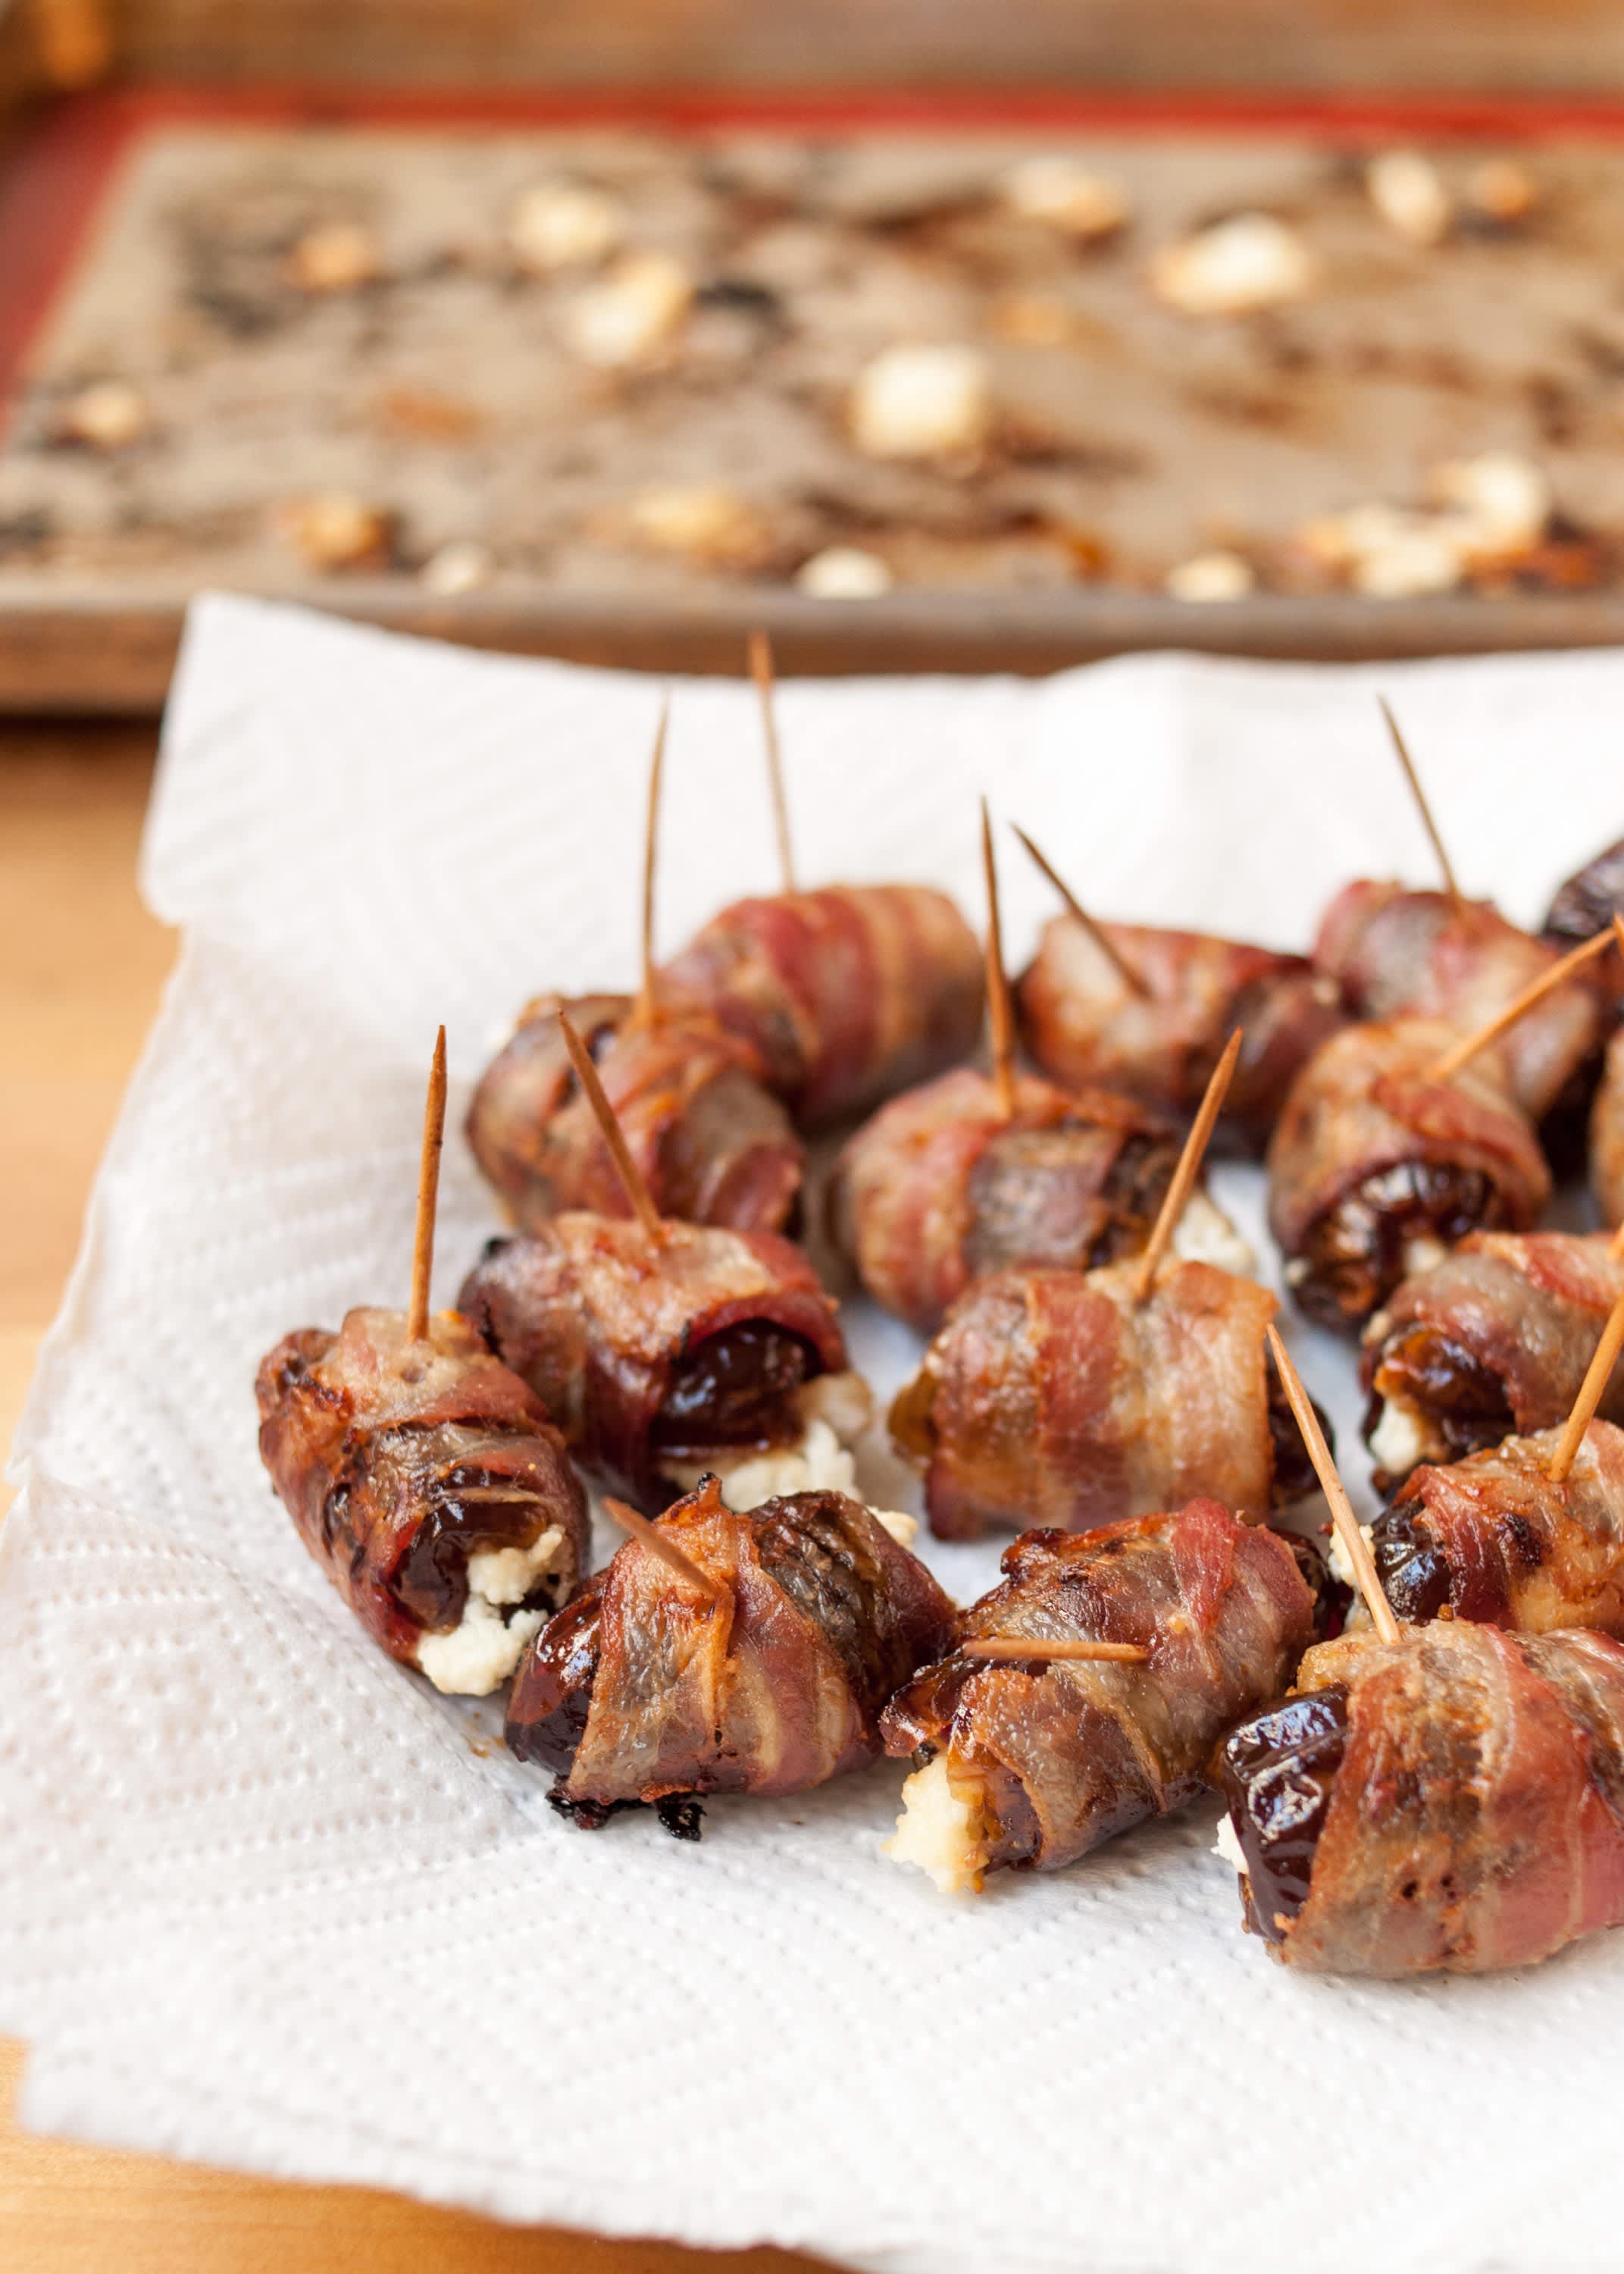 How To Make Bacon-Wrapped Dates | Kitchn